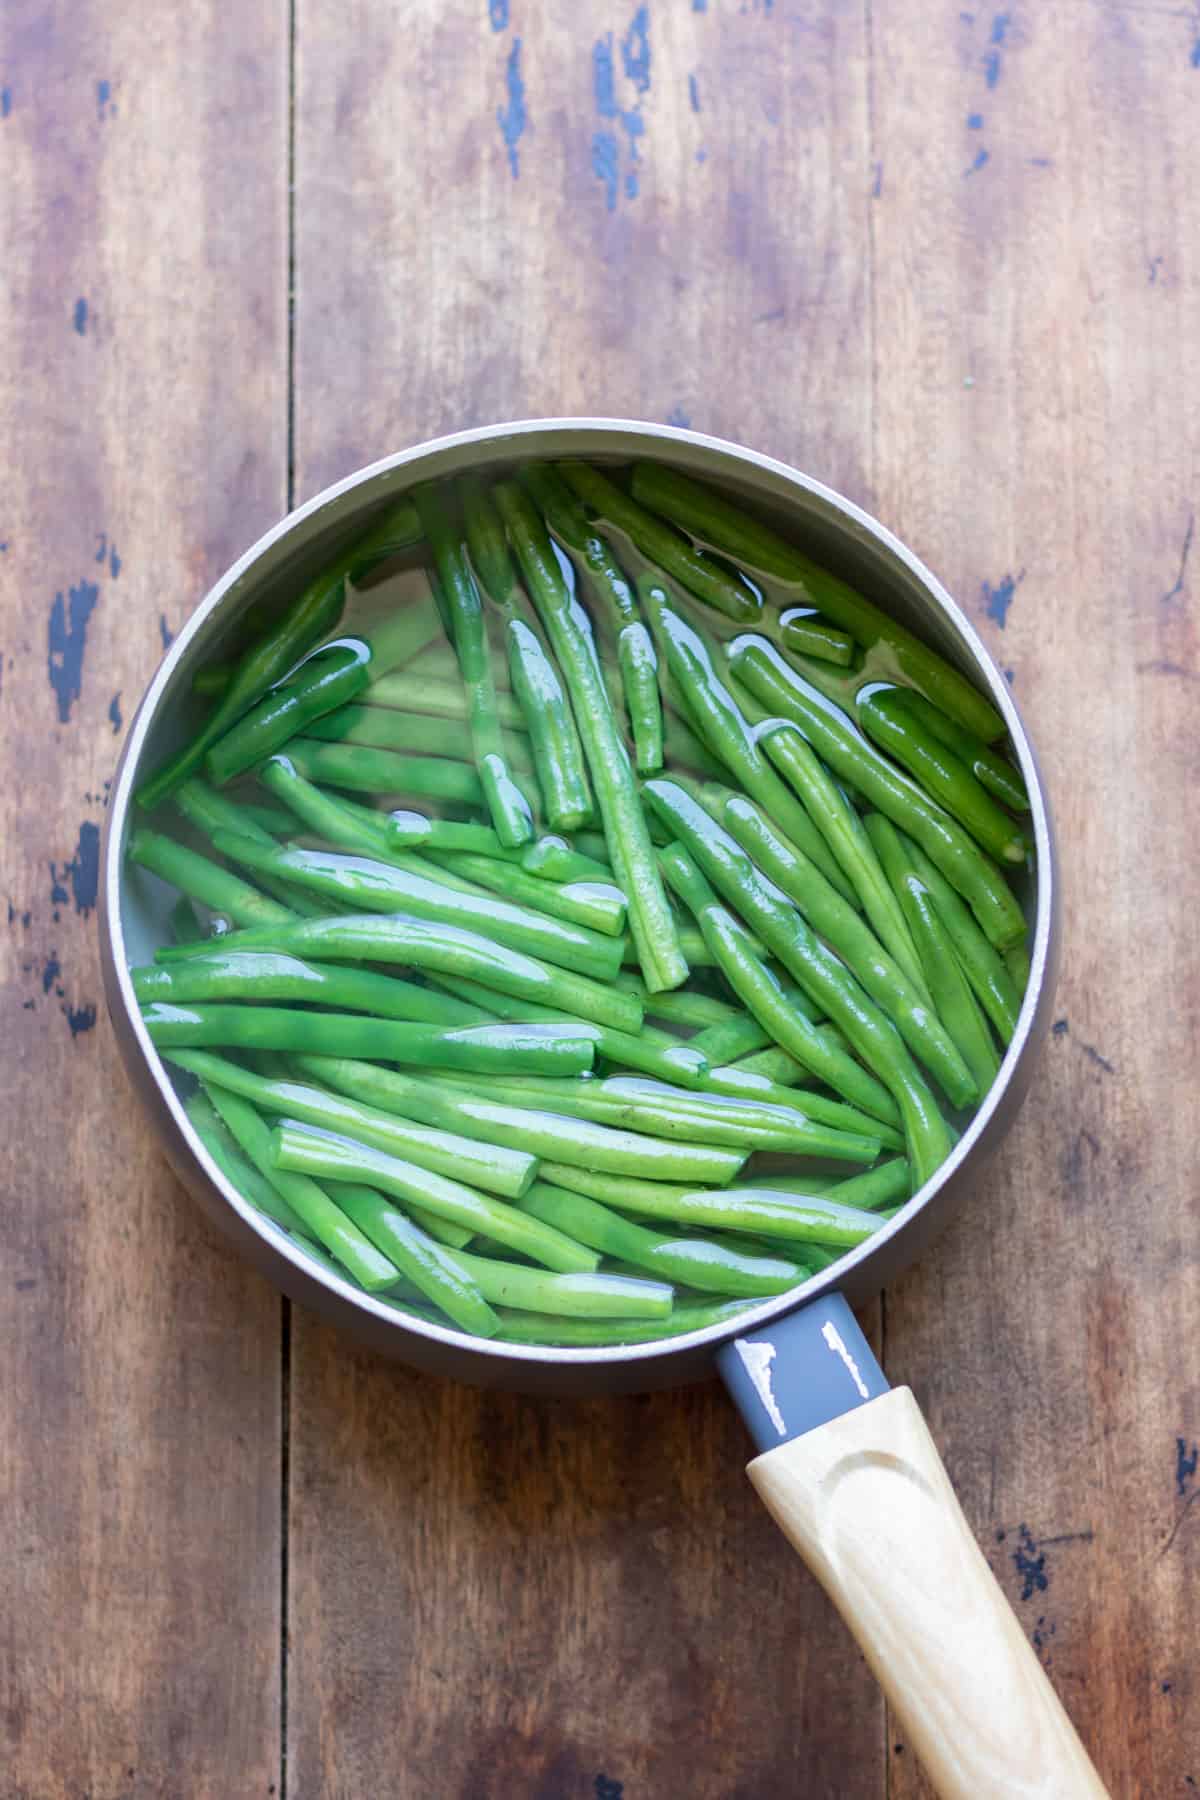 Blanching green beans in a pot of water.